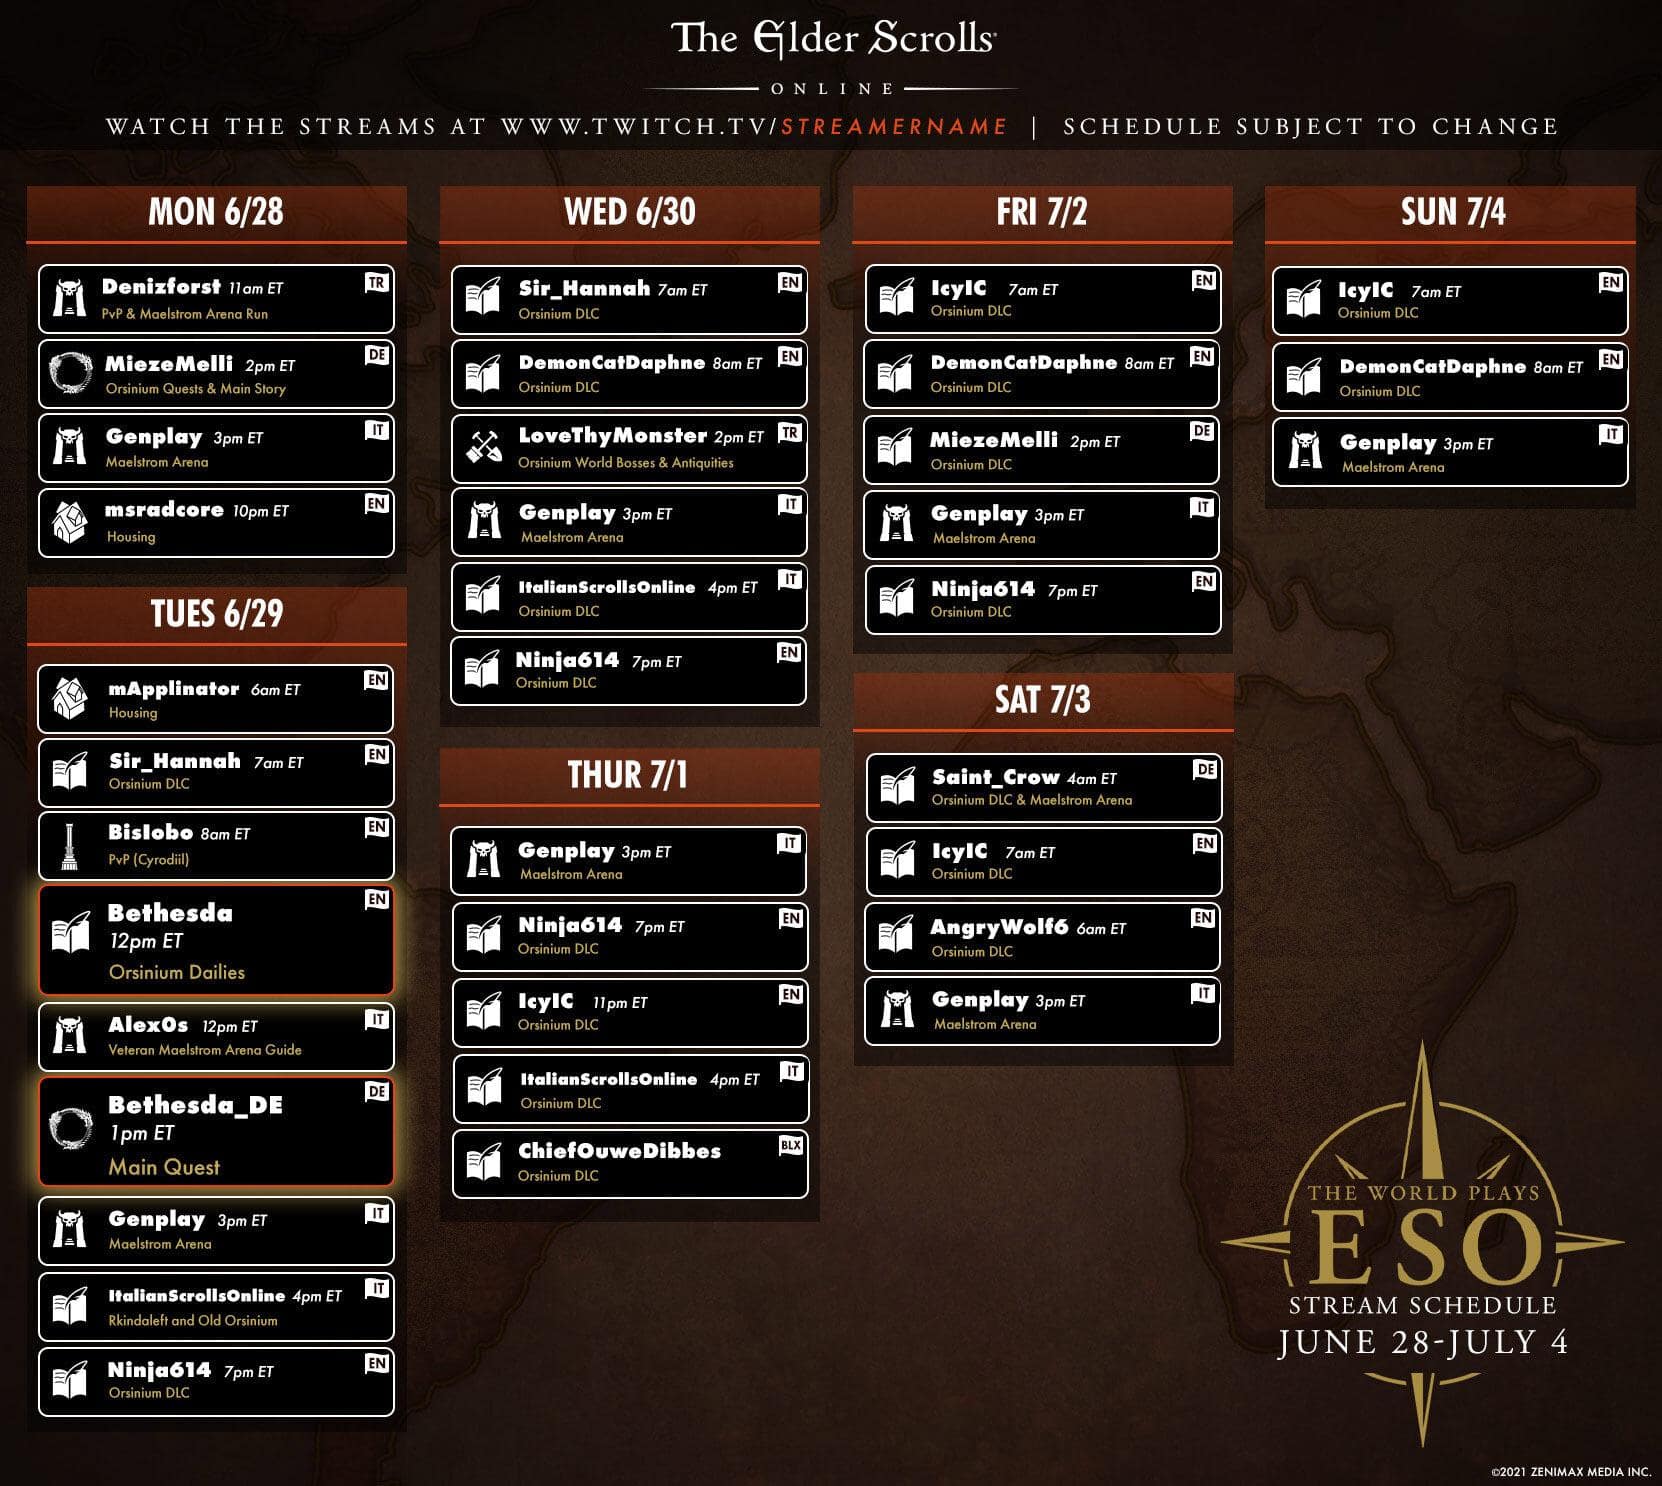 World Plays ESO Is Live! Check Out Our First Wave of Participants The